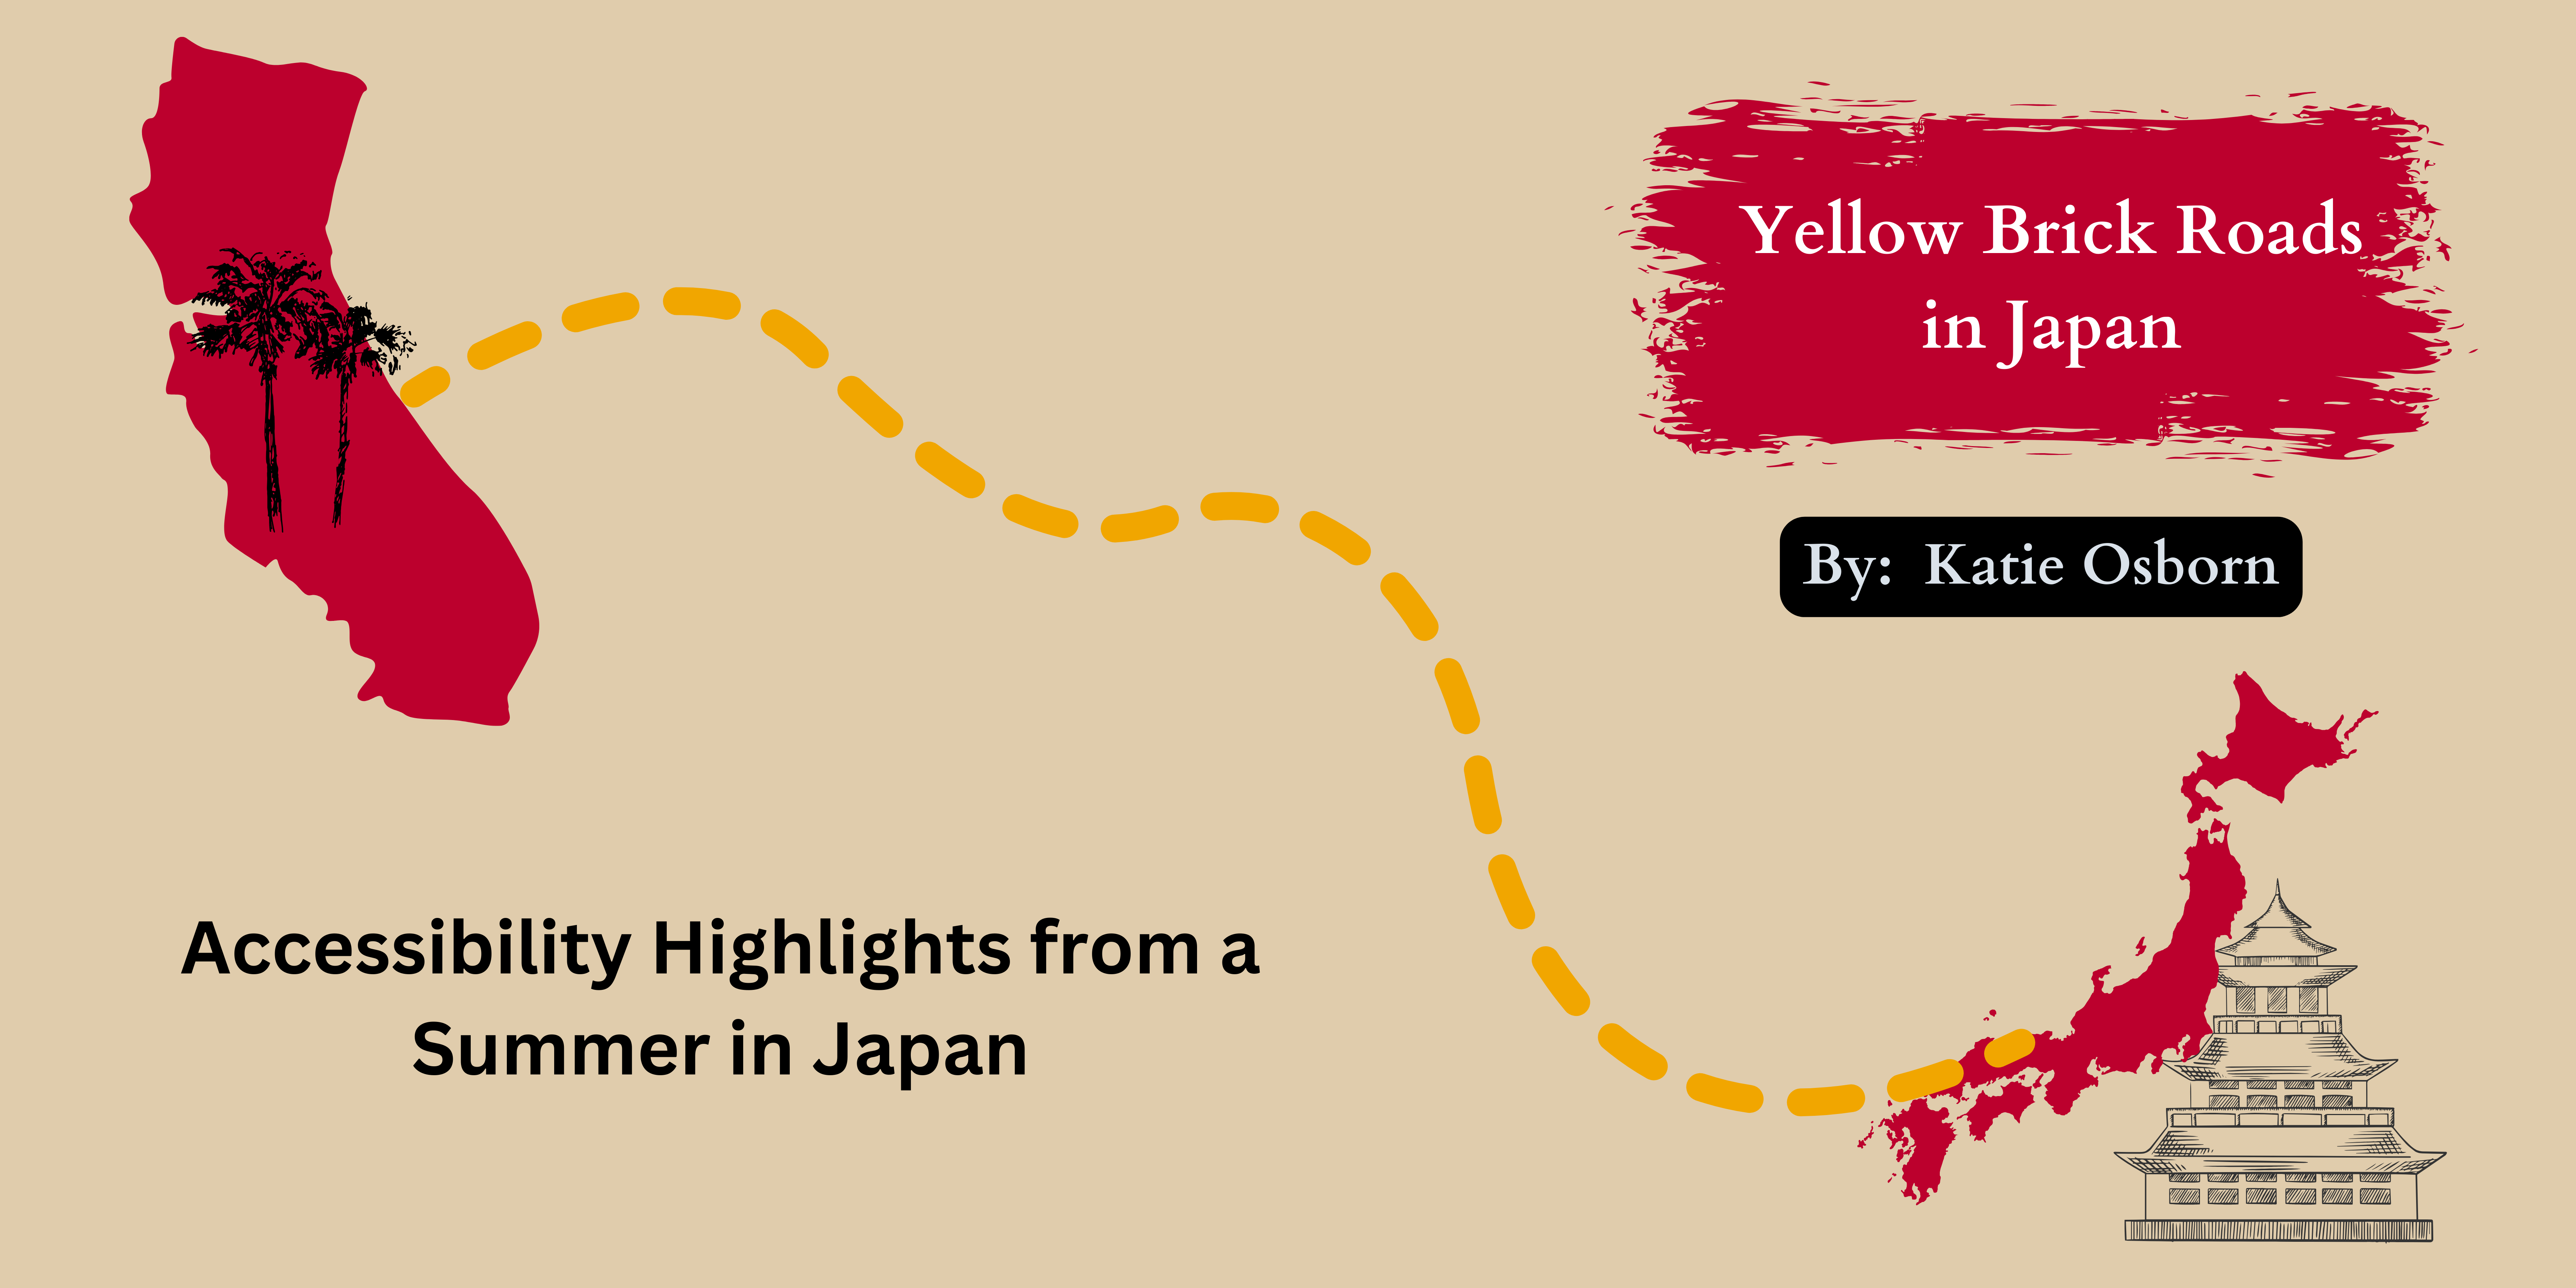 Title:  Yellow Brick Roads in Japan, By: Katie Osborn, Accessibility Highlights from a summer in Japan.  Silhouettes of California with palm trees and Japan with a pagoda with a dotted line between them implying travel